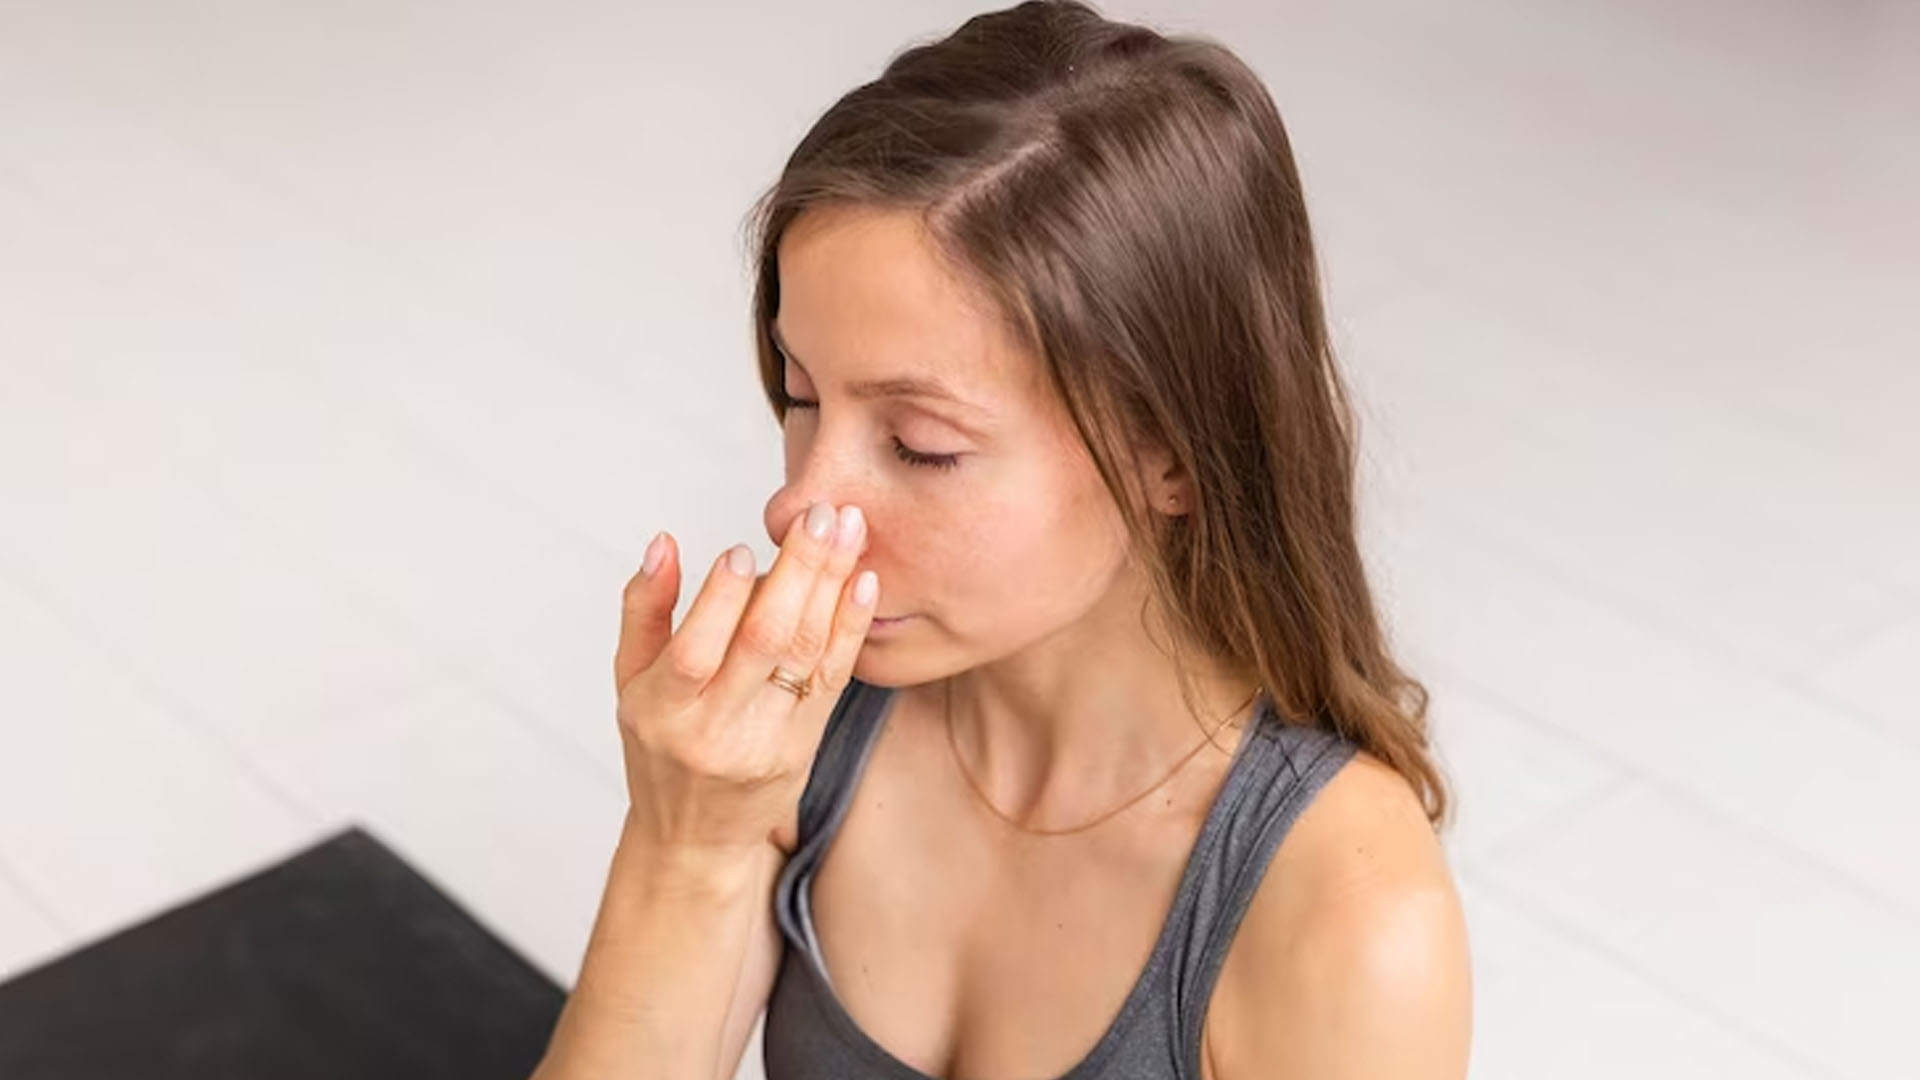 What are the Symptoms of Nasal Congestion?